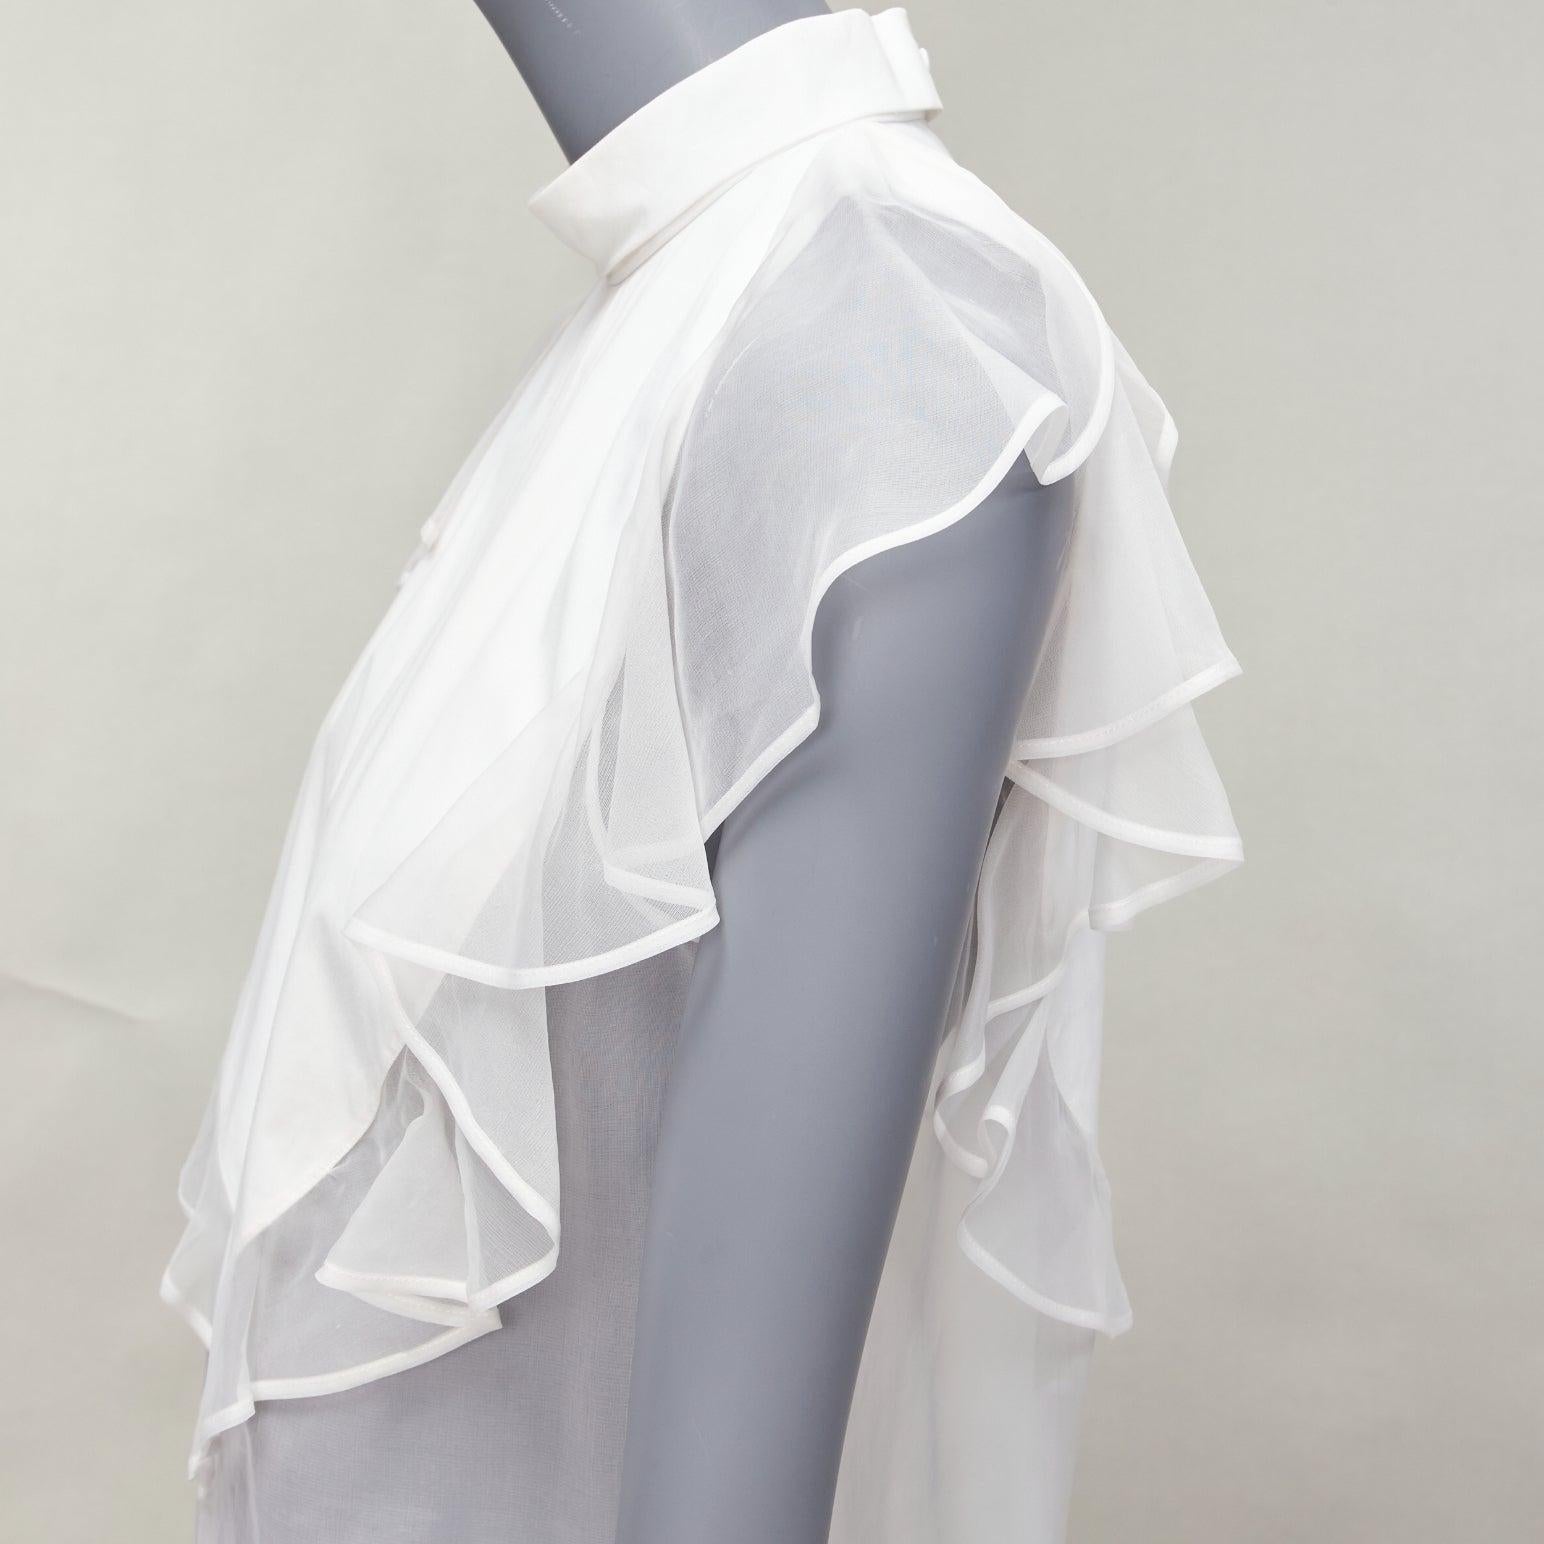 GIVENCHY white silky sheer ruffles front hi neck collar sleeveless shirt
Reference: NKLL/A00172
Brand: Givenchy
Designer: Riccardo Tisci
Material: Feels like cotton
Color: White
Pattern: Solid
Closure: Zip
Lining: White Fabric
Extra Details: Back